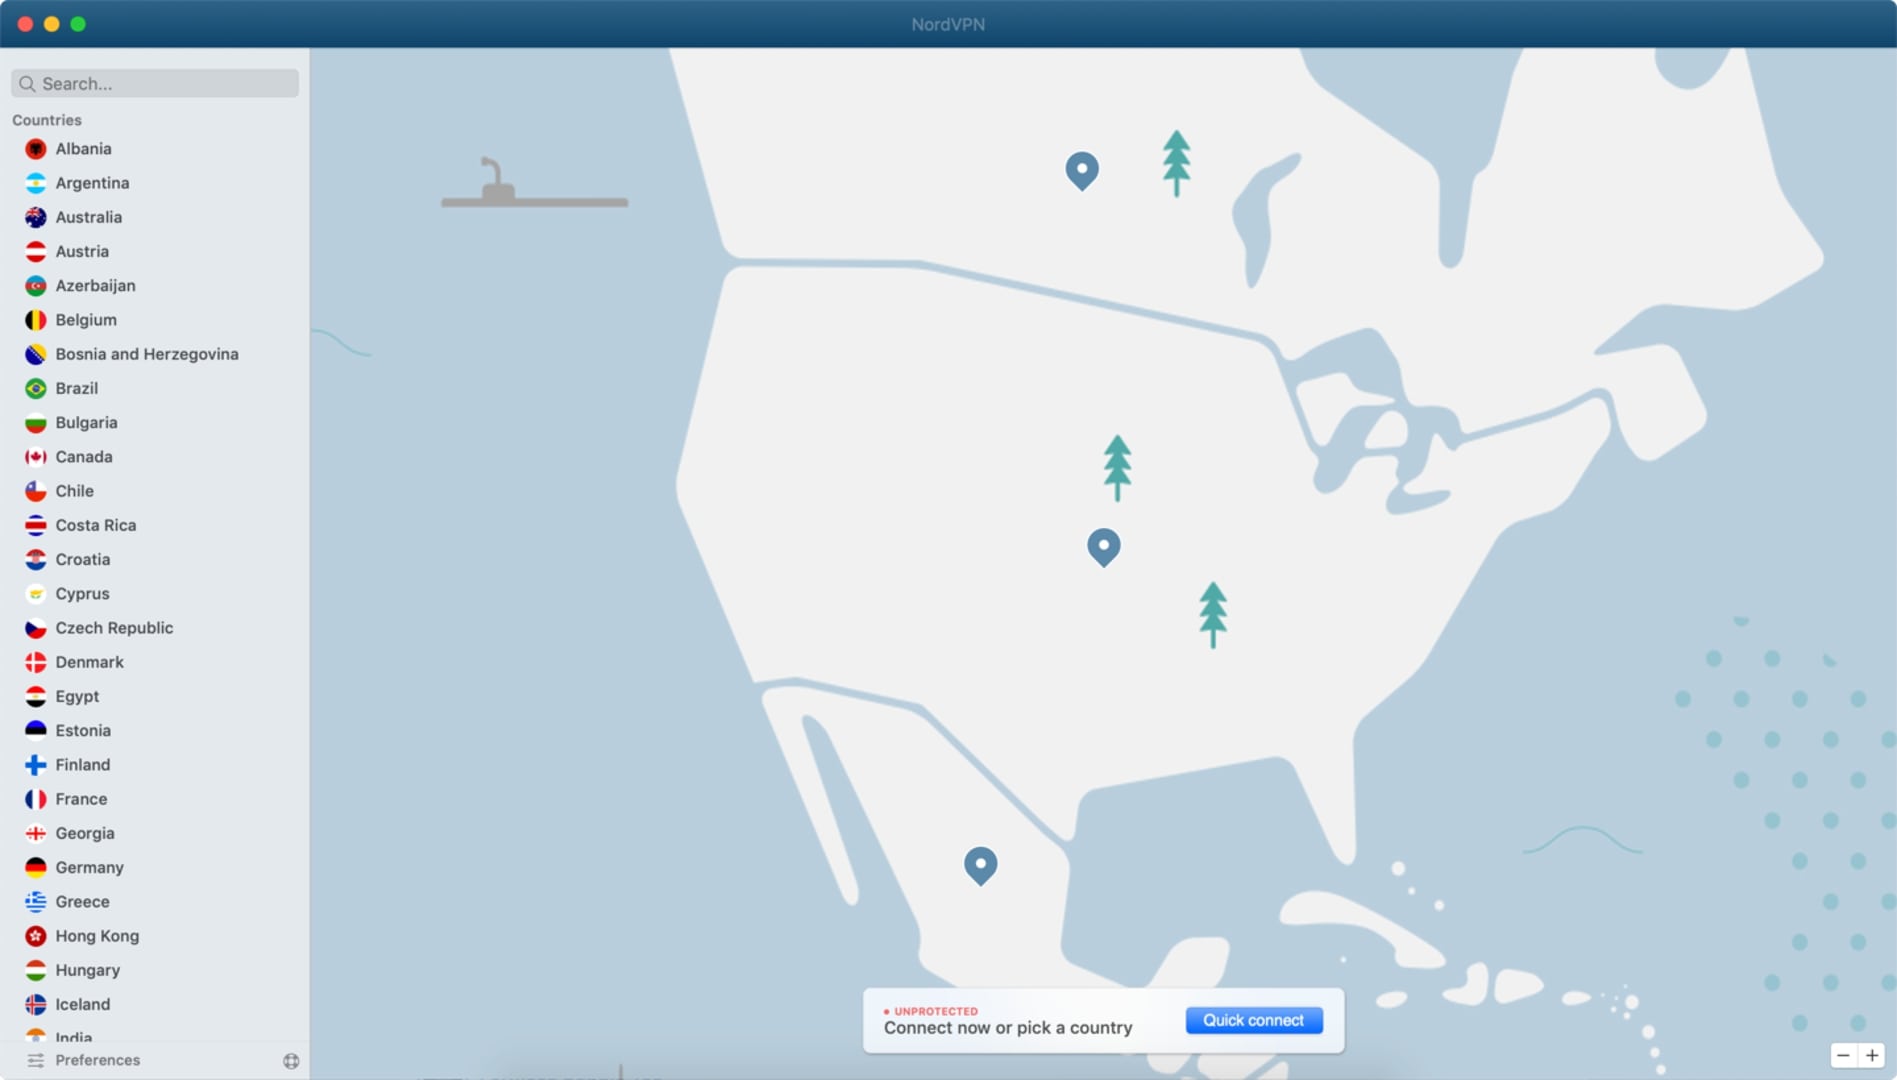 NordVPN application interface on a macOS with a map view showing various server locations